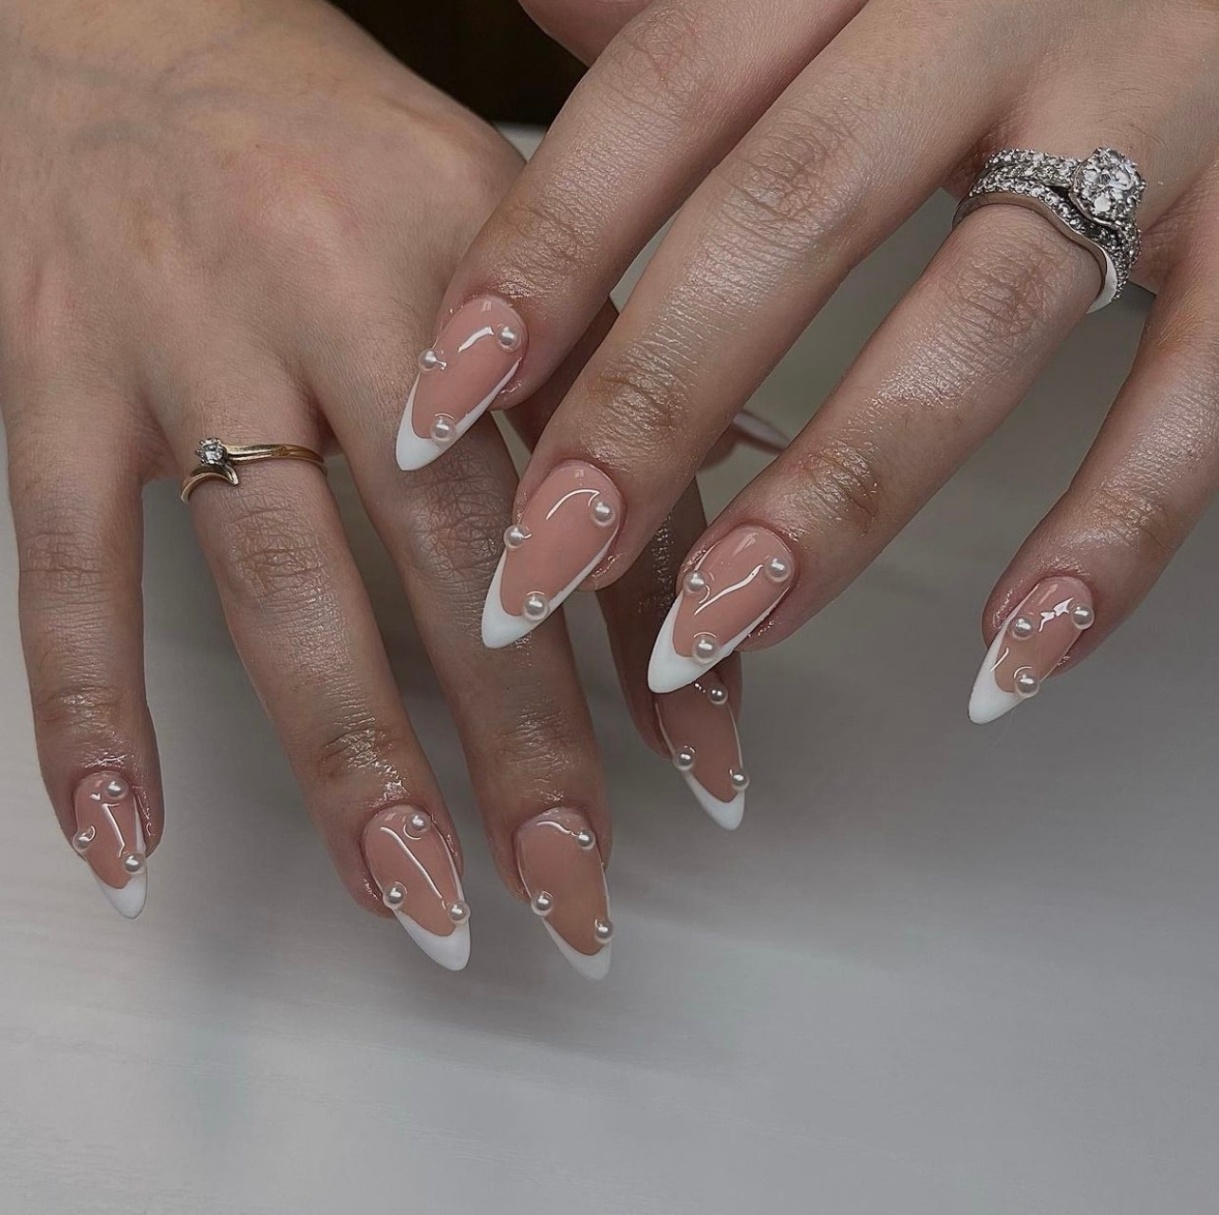 Get Nailed: Stunning Wedding Nail Designs For Your Big Day!